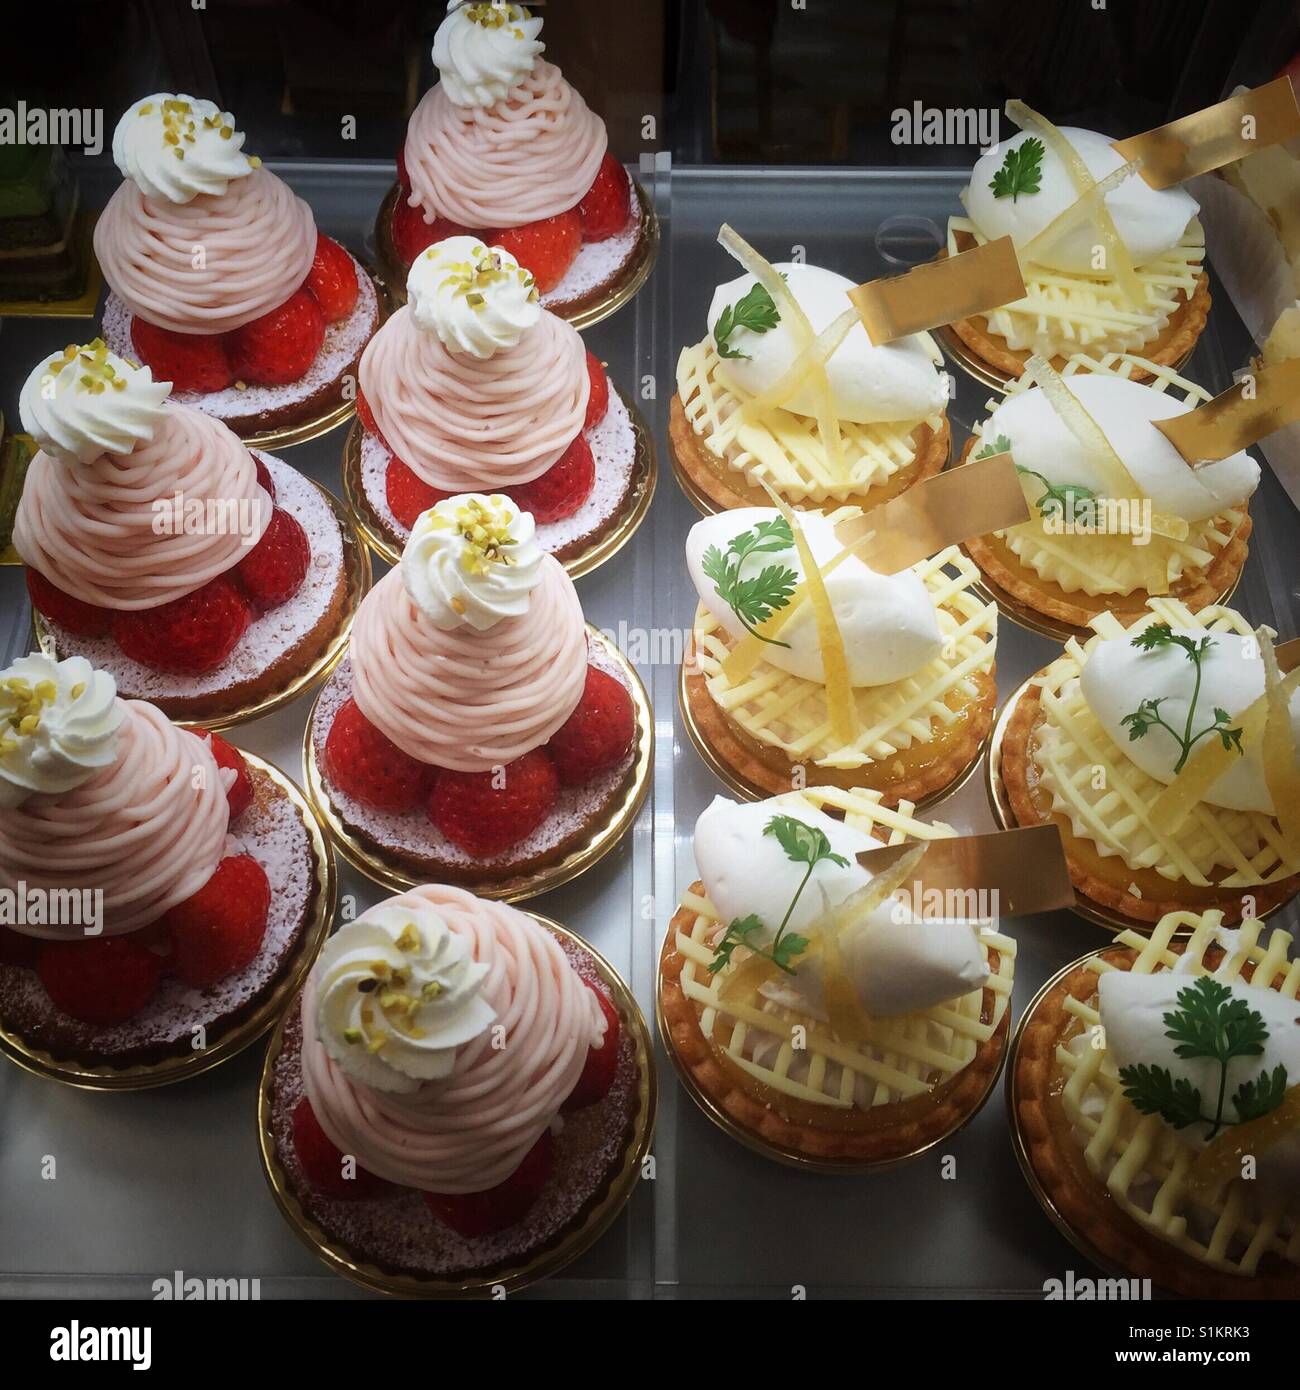 Beautiful little cakes artfully decorated on display in department store in Kyoto Stock Photo